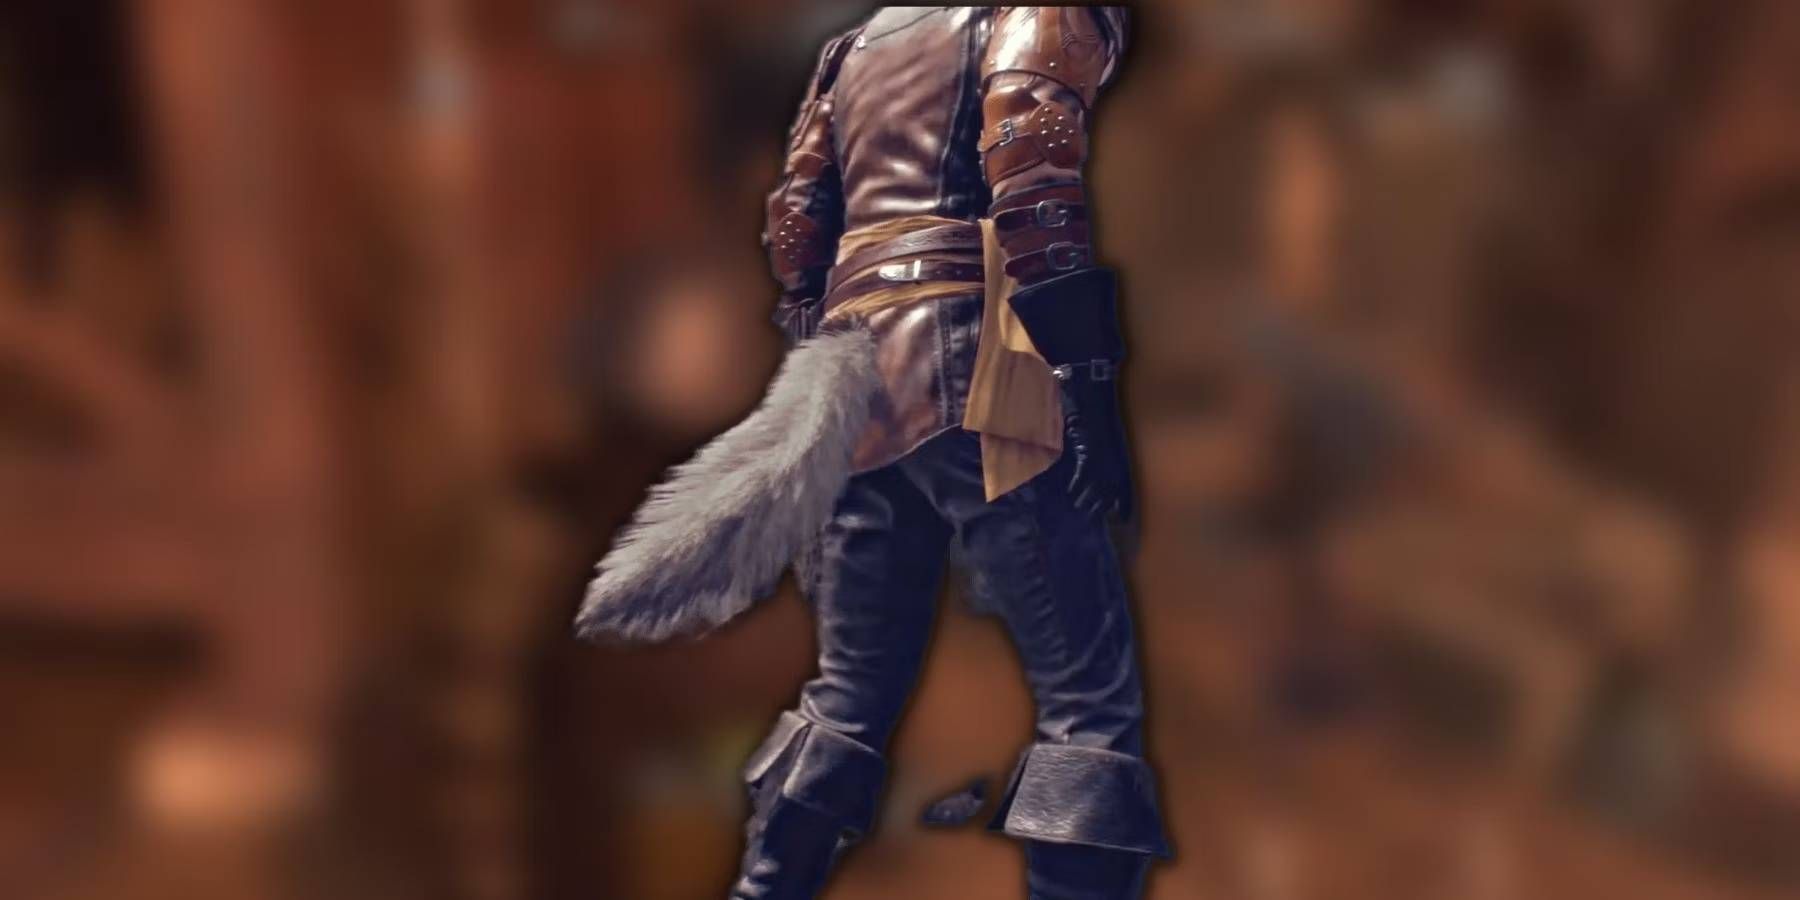 Resident Evil 4 Remake Wolf Tail Accessory with Standard Gameplay in the Faded Background